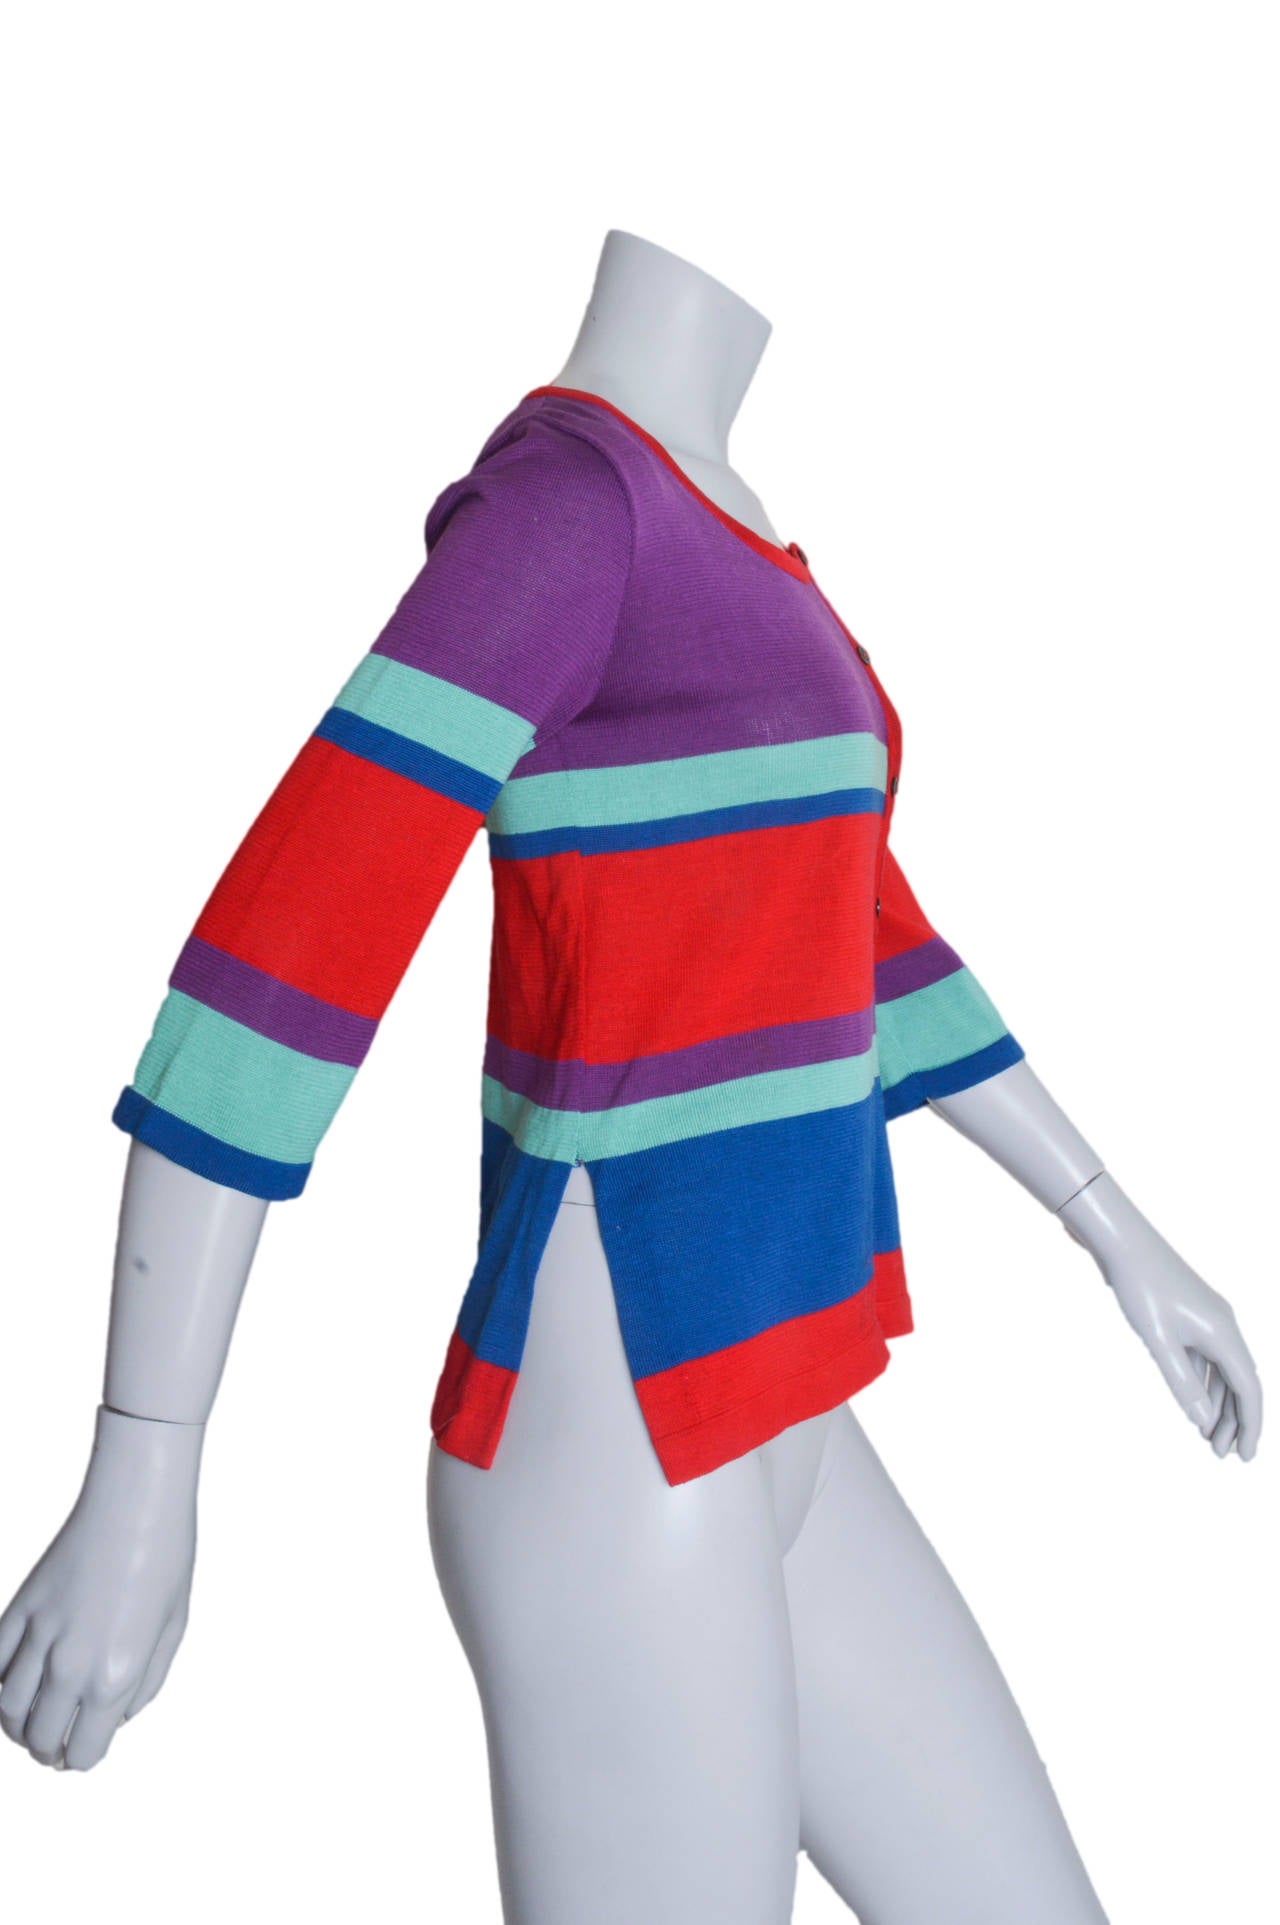 Vibrant vintage YSL Rive Gauche knit top.
Light weight knit sweater.
Features 4 button closure, elbow sleeve.
Side vents.
Slightly stretchy.
Lovely drape on the body.